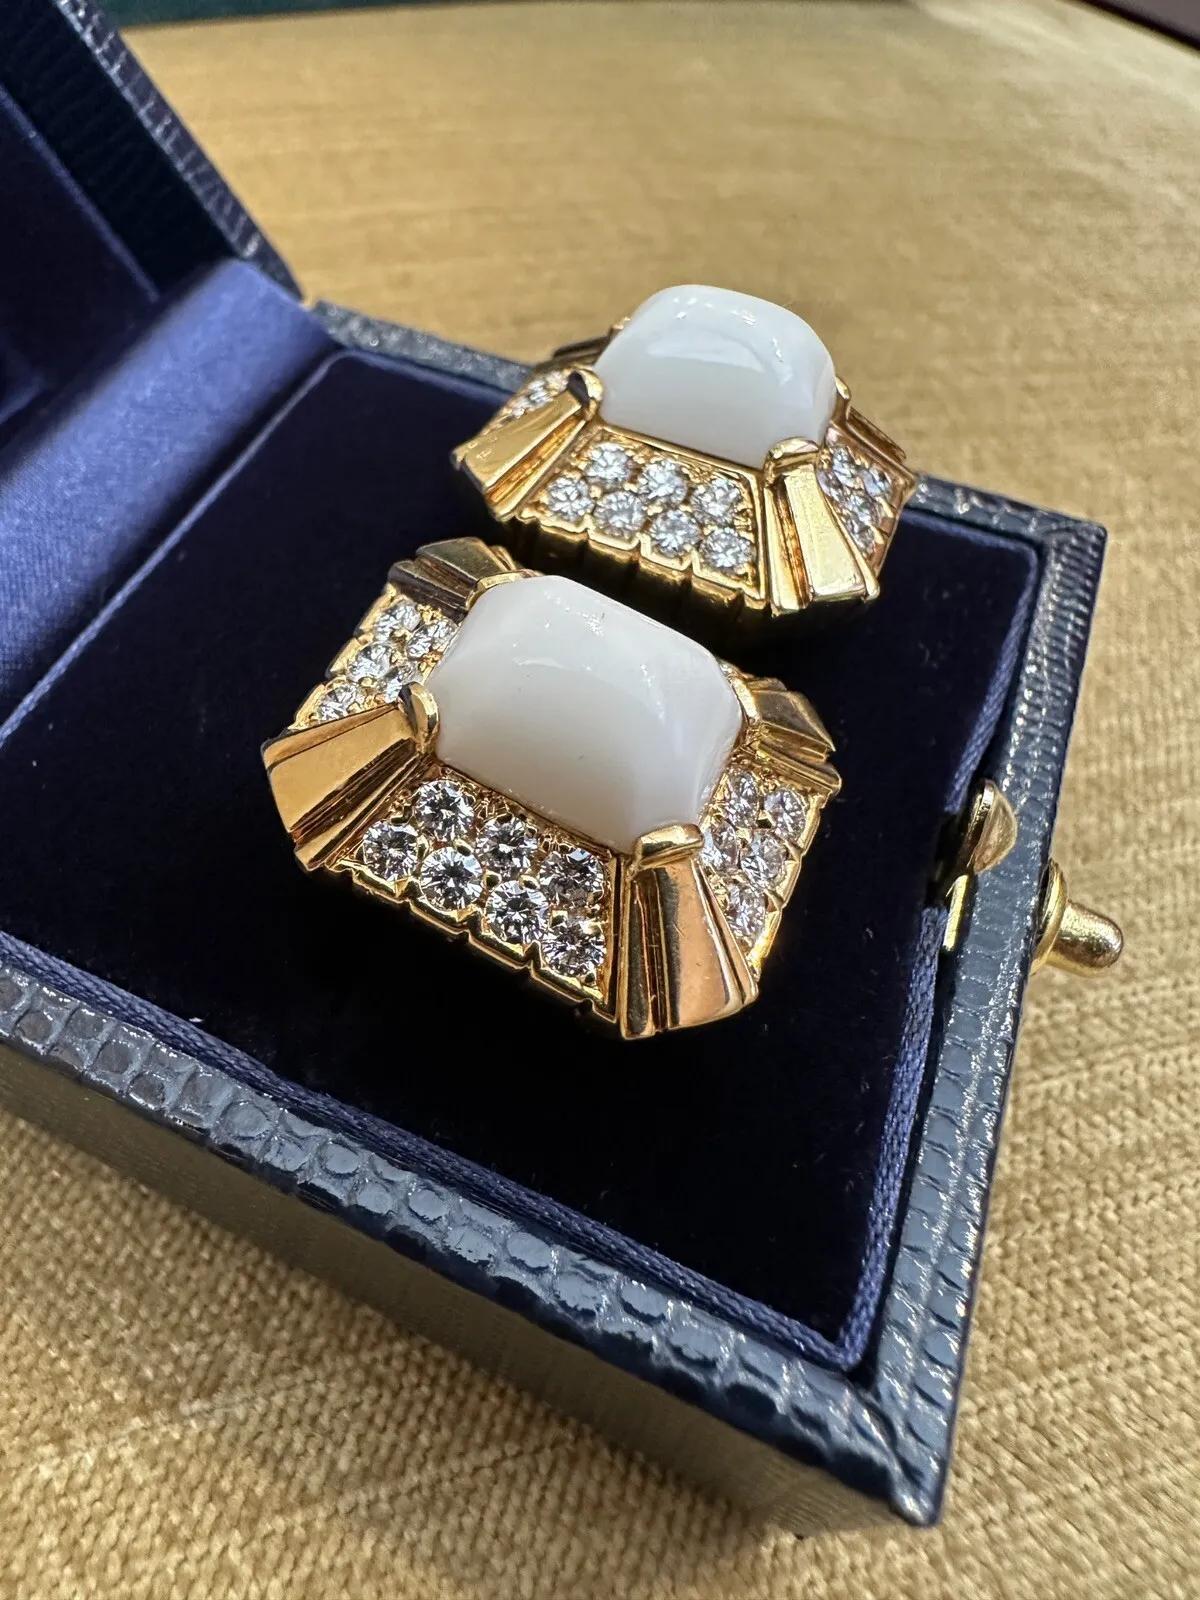 White Coral and Diamond Clip on Earrings in 18k Yellow Gold 

Diamond and White Coral Earrings feature a large Rectangular White Coral Cabochon surrounded by 2 Rows of Round Brilliant Diamonds, all set in high polished 18k Yellow Gold. Earrings are